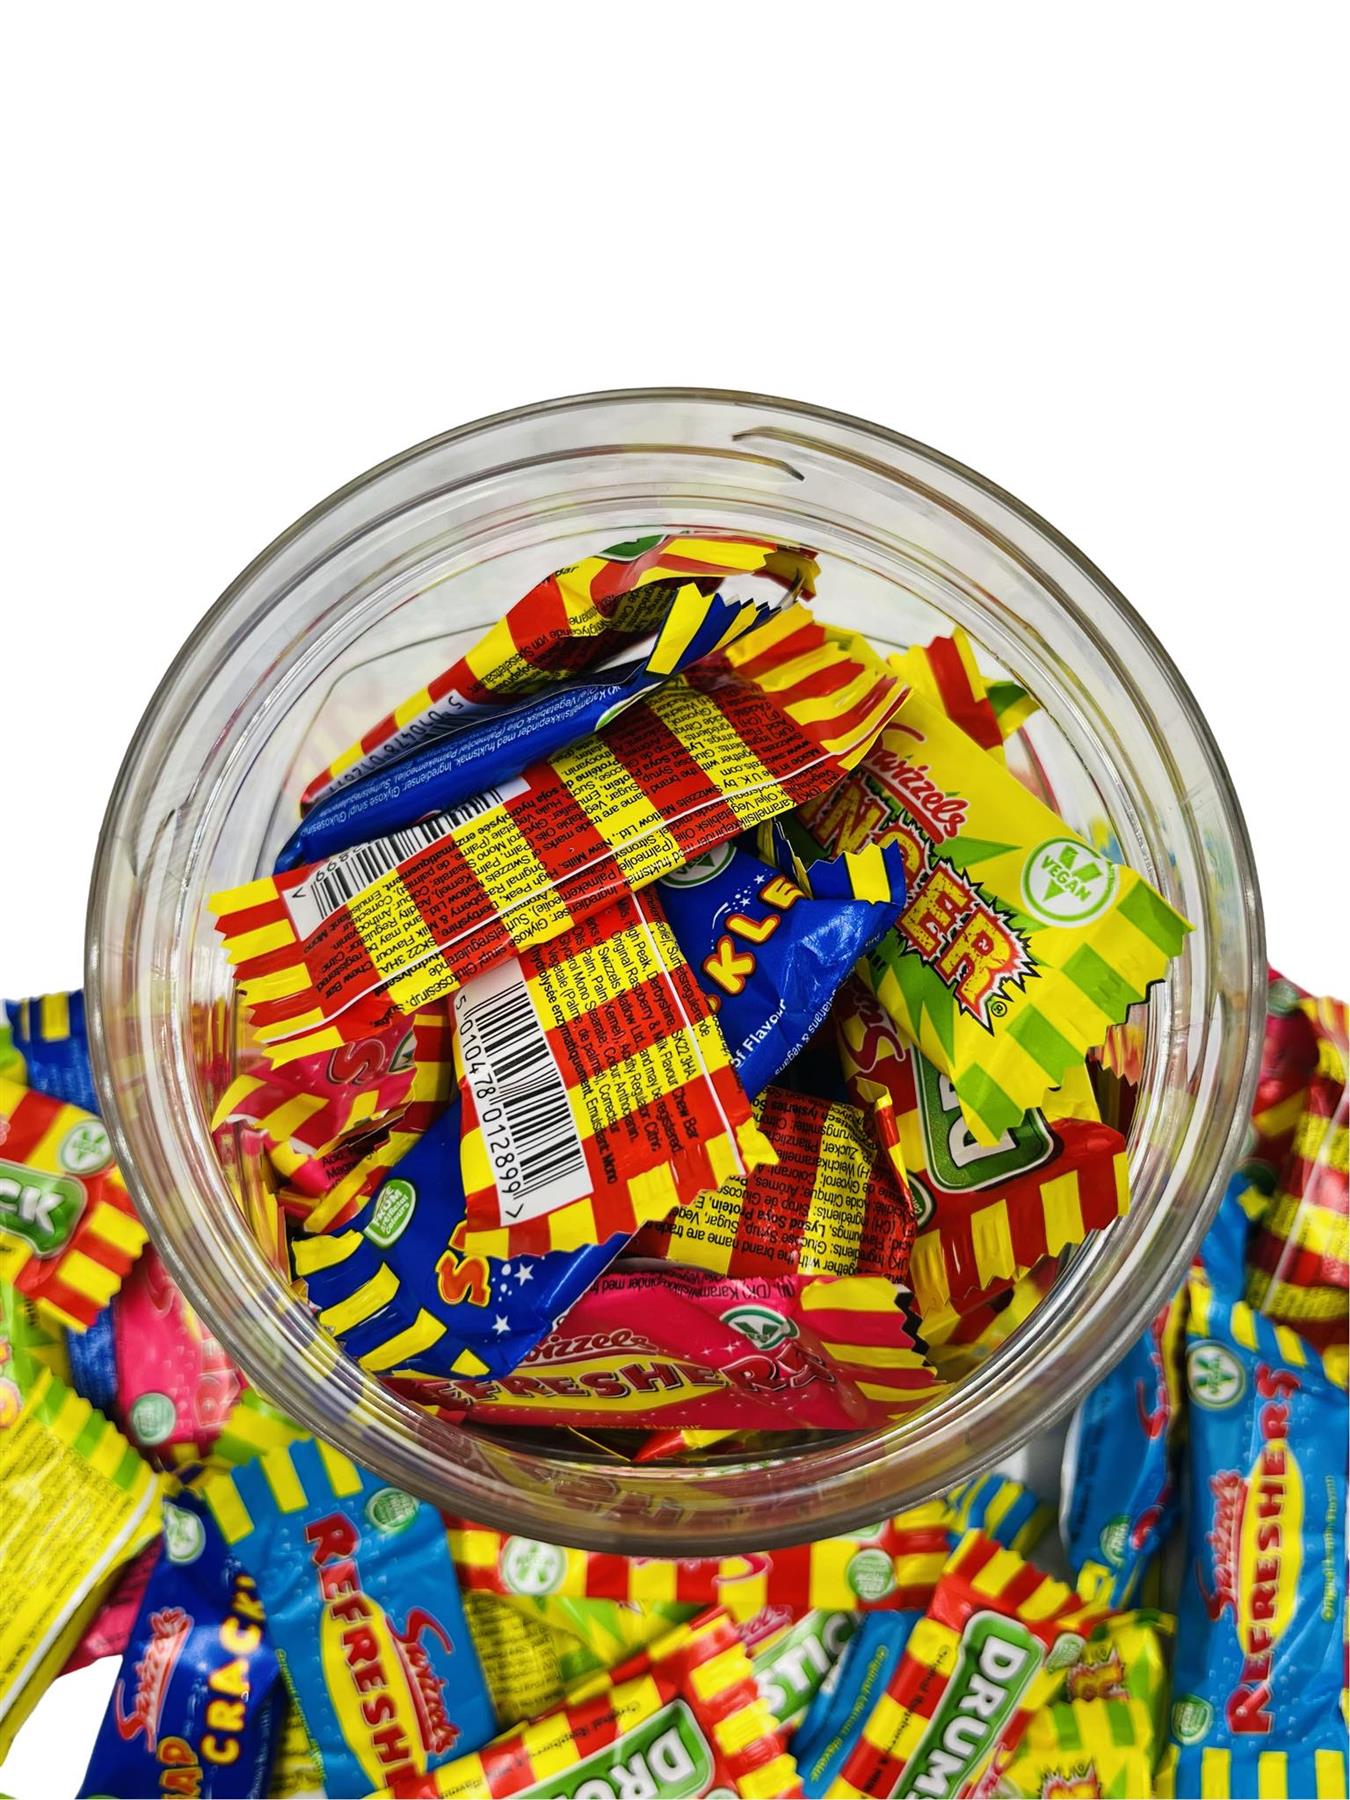 Simway Sweets Jar 615g - Swizzels Mini Bars Mix - Individually Wrapped Sweets - Approximately 56 Pieces